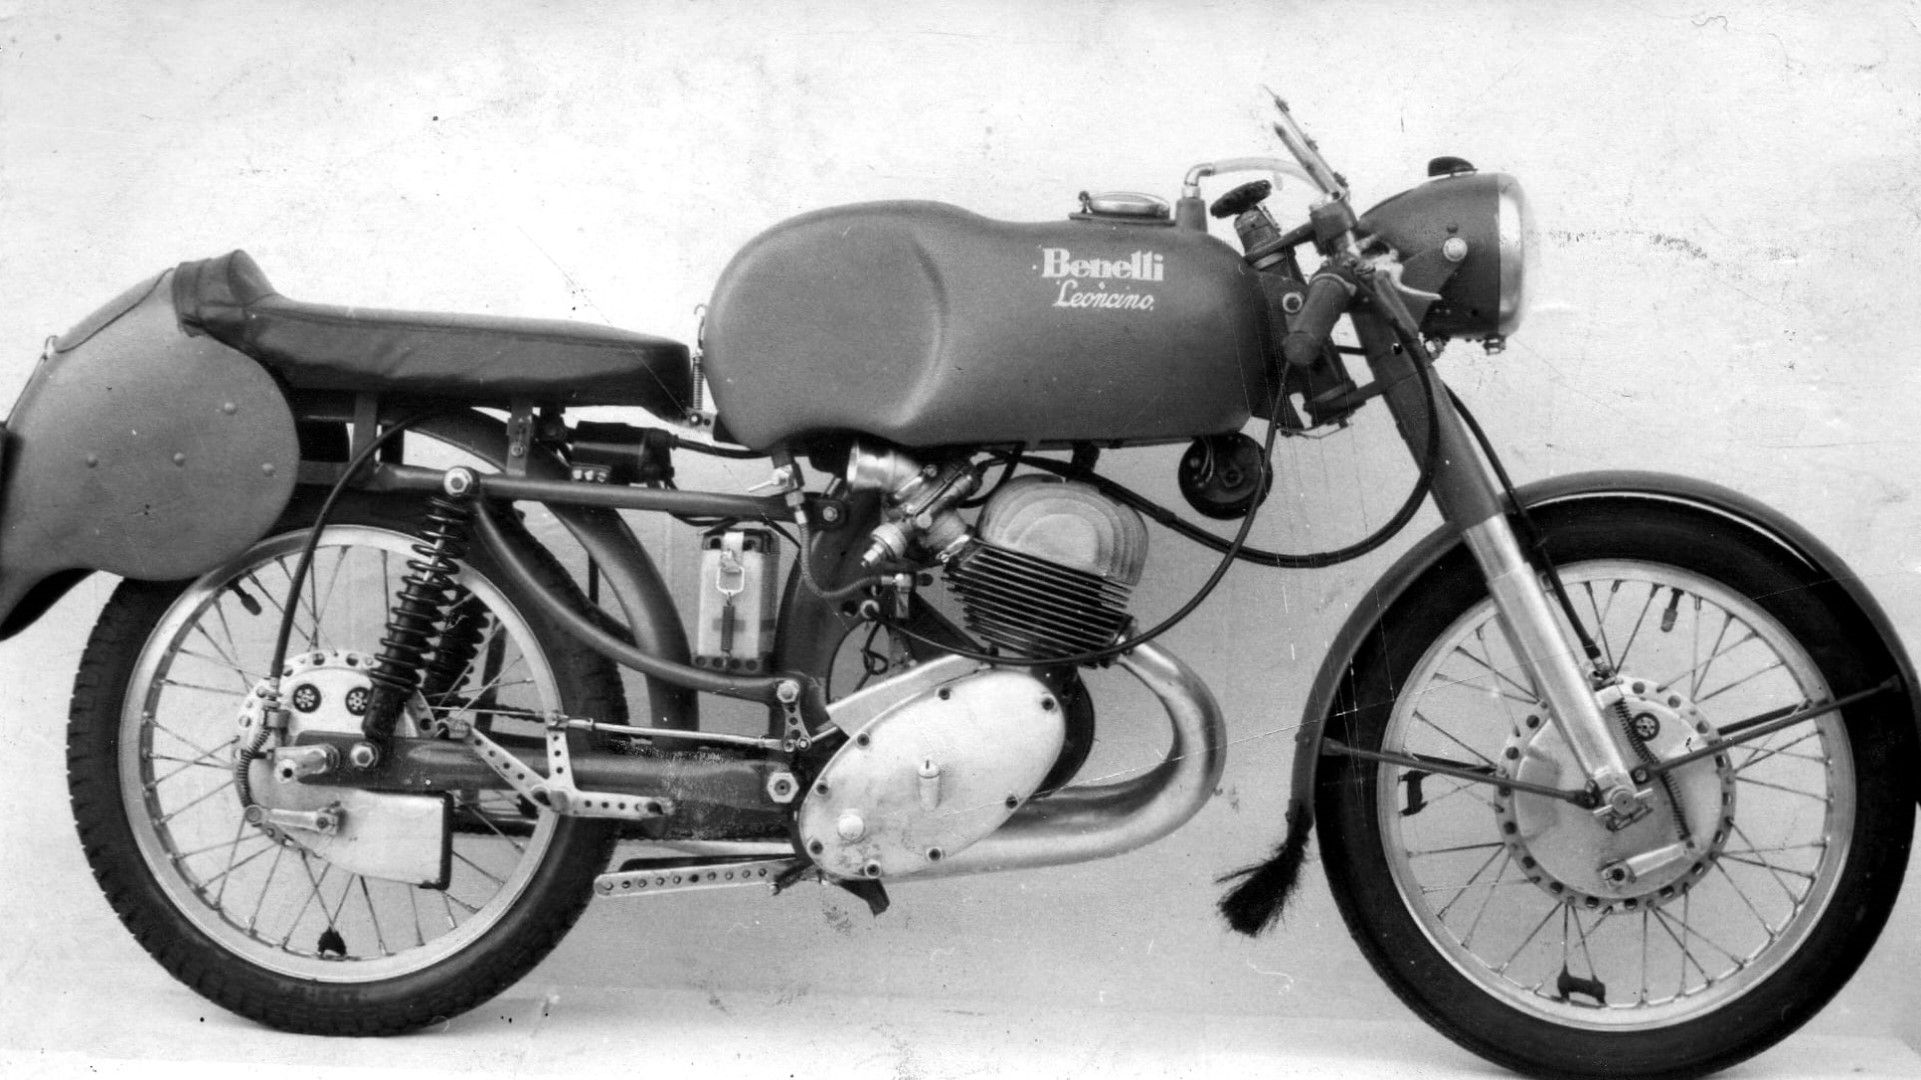 1957 Benelli 125cc Leoncino F3 Racing Motorcycle side profile view